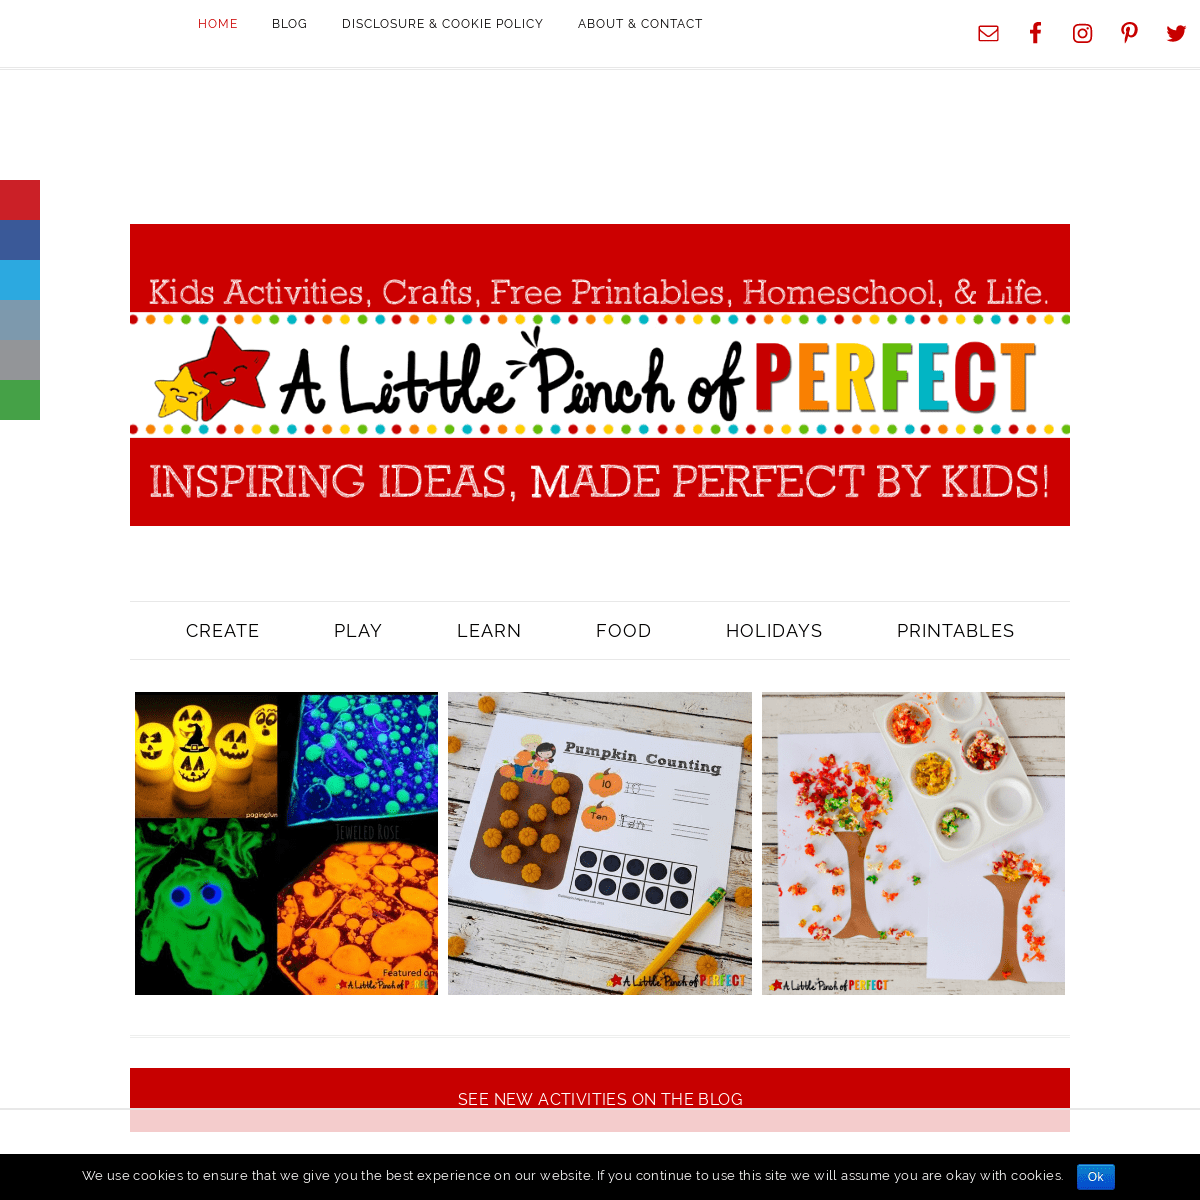 A complete backup of alittlepinchofperfect.com